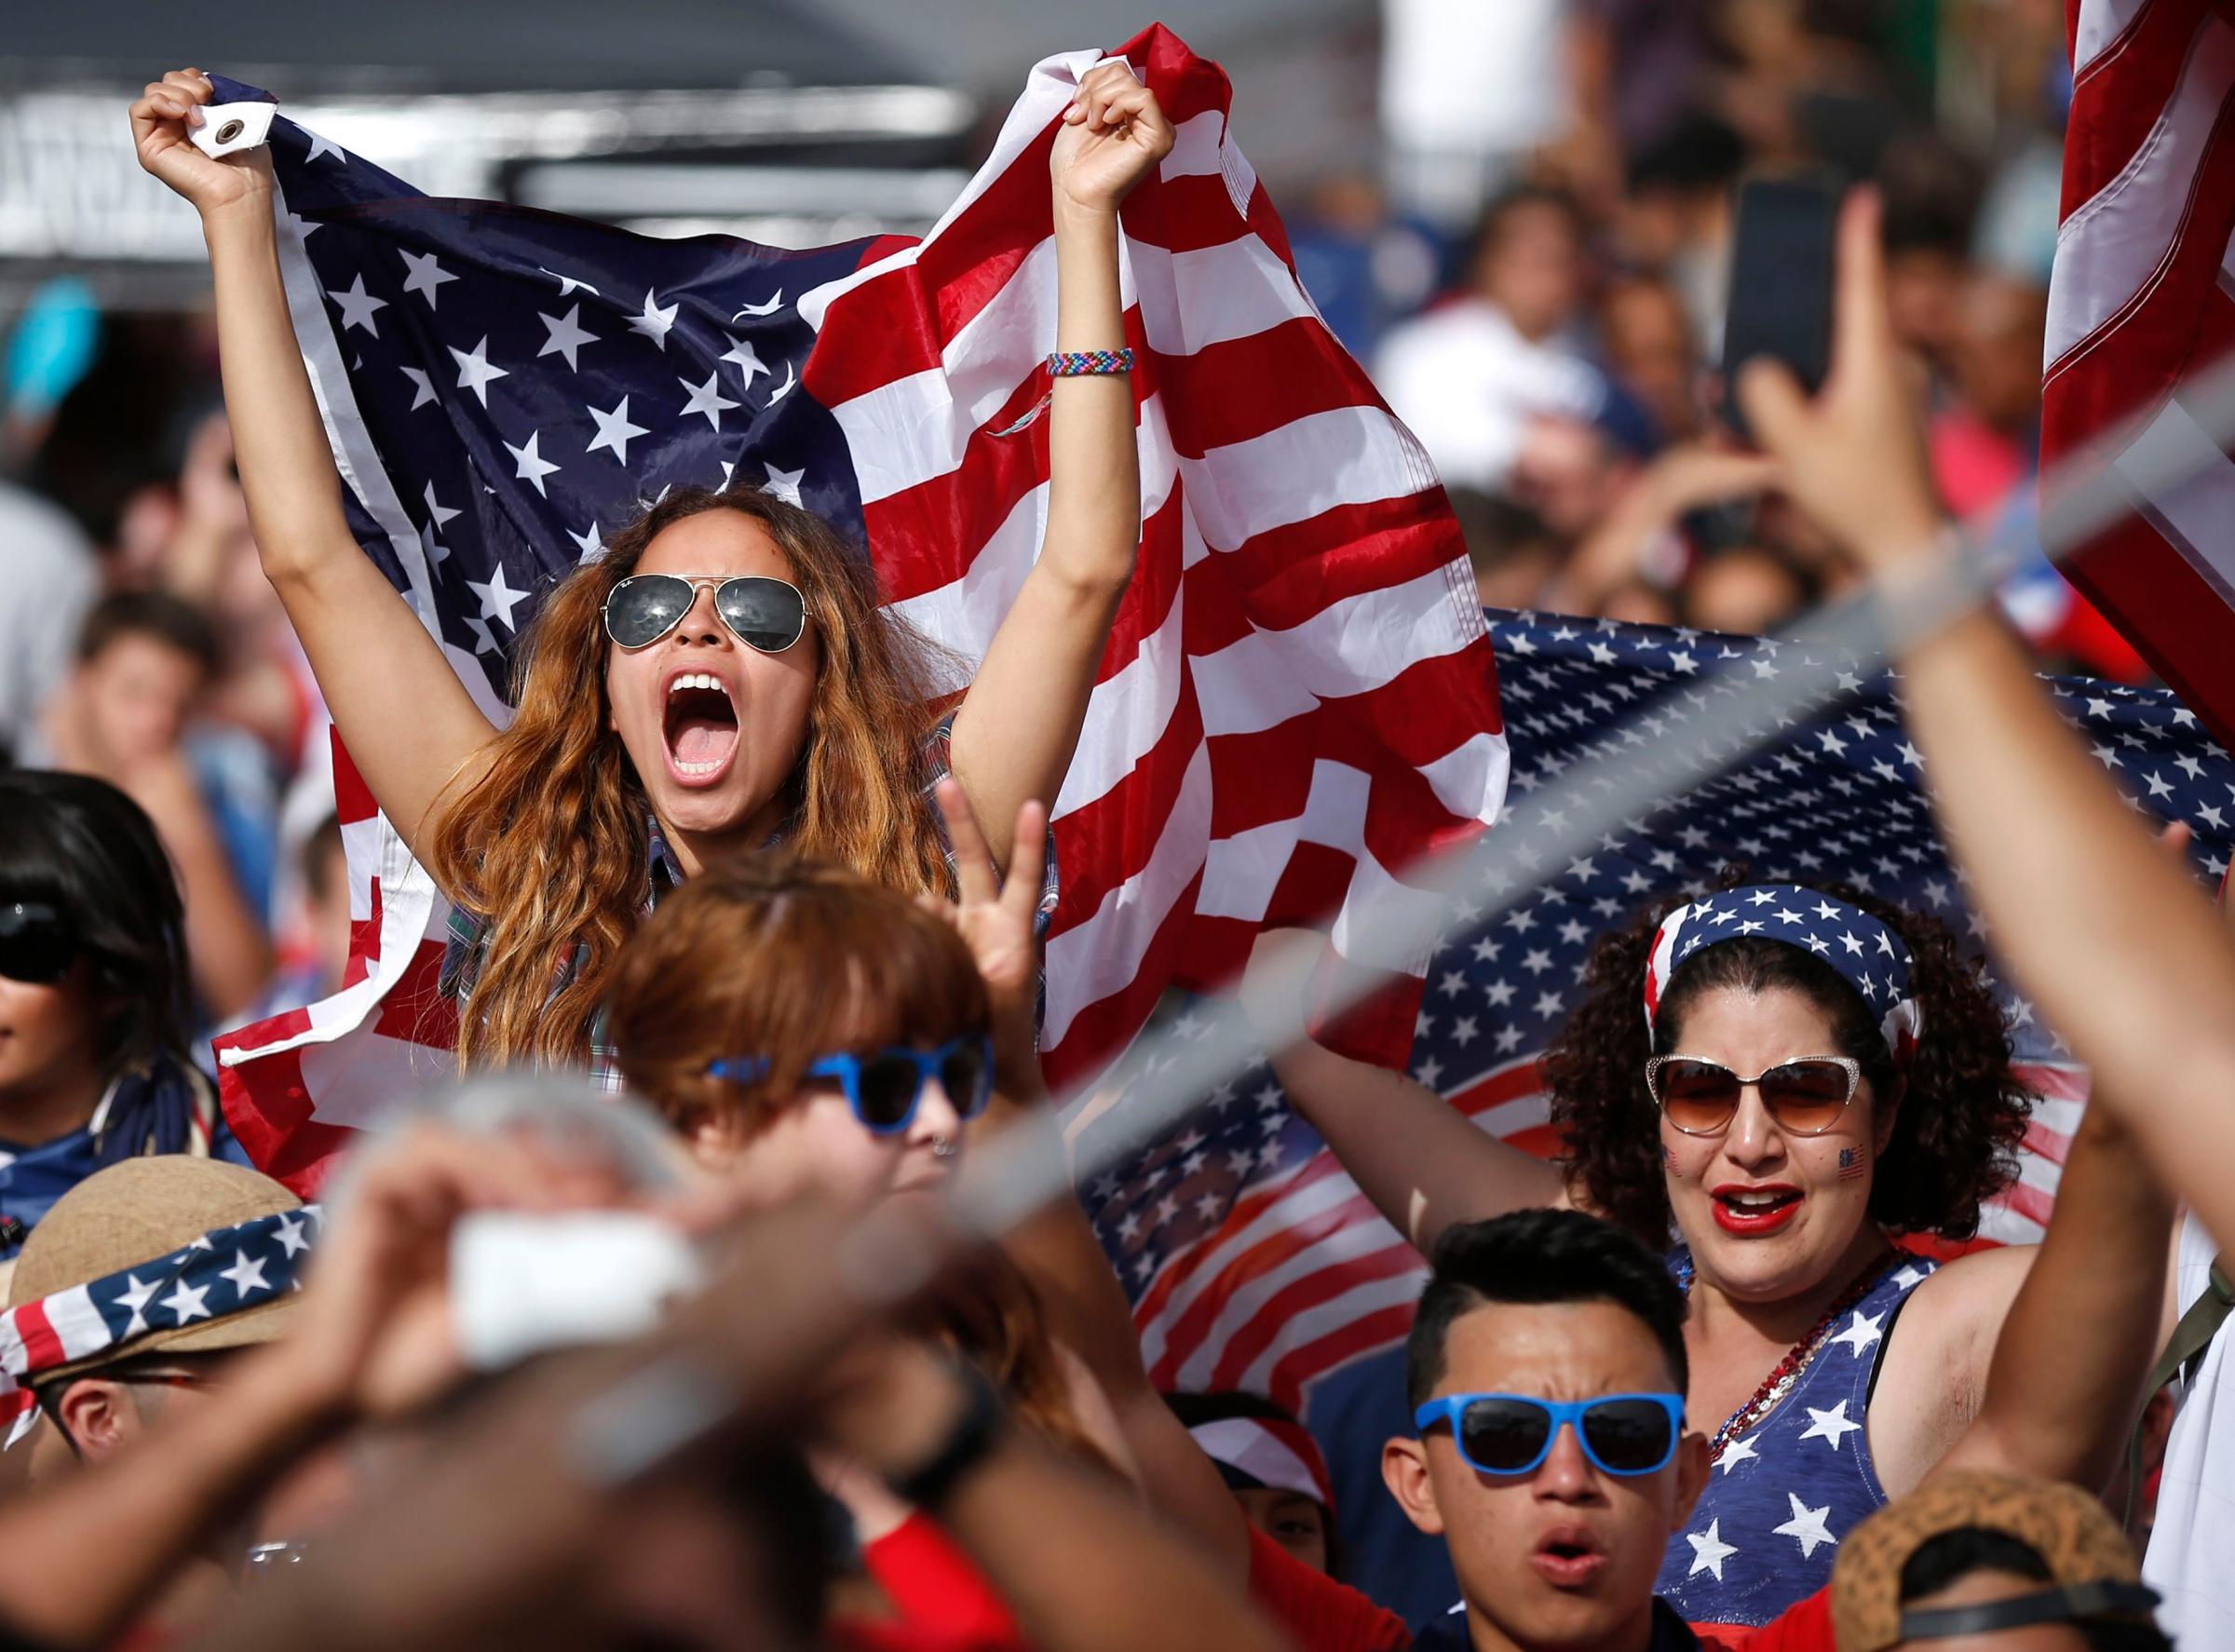 Fans cheer during the 2014 World Cup Group G soccer match between Ghana and the U.S. at a viewing party in Hermosa Beach